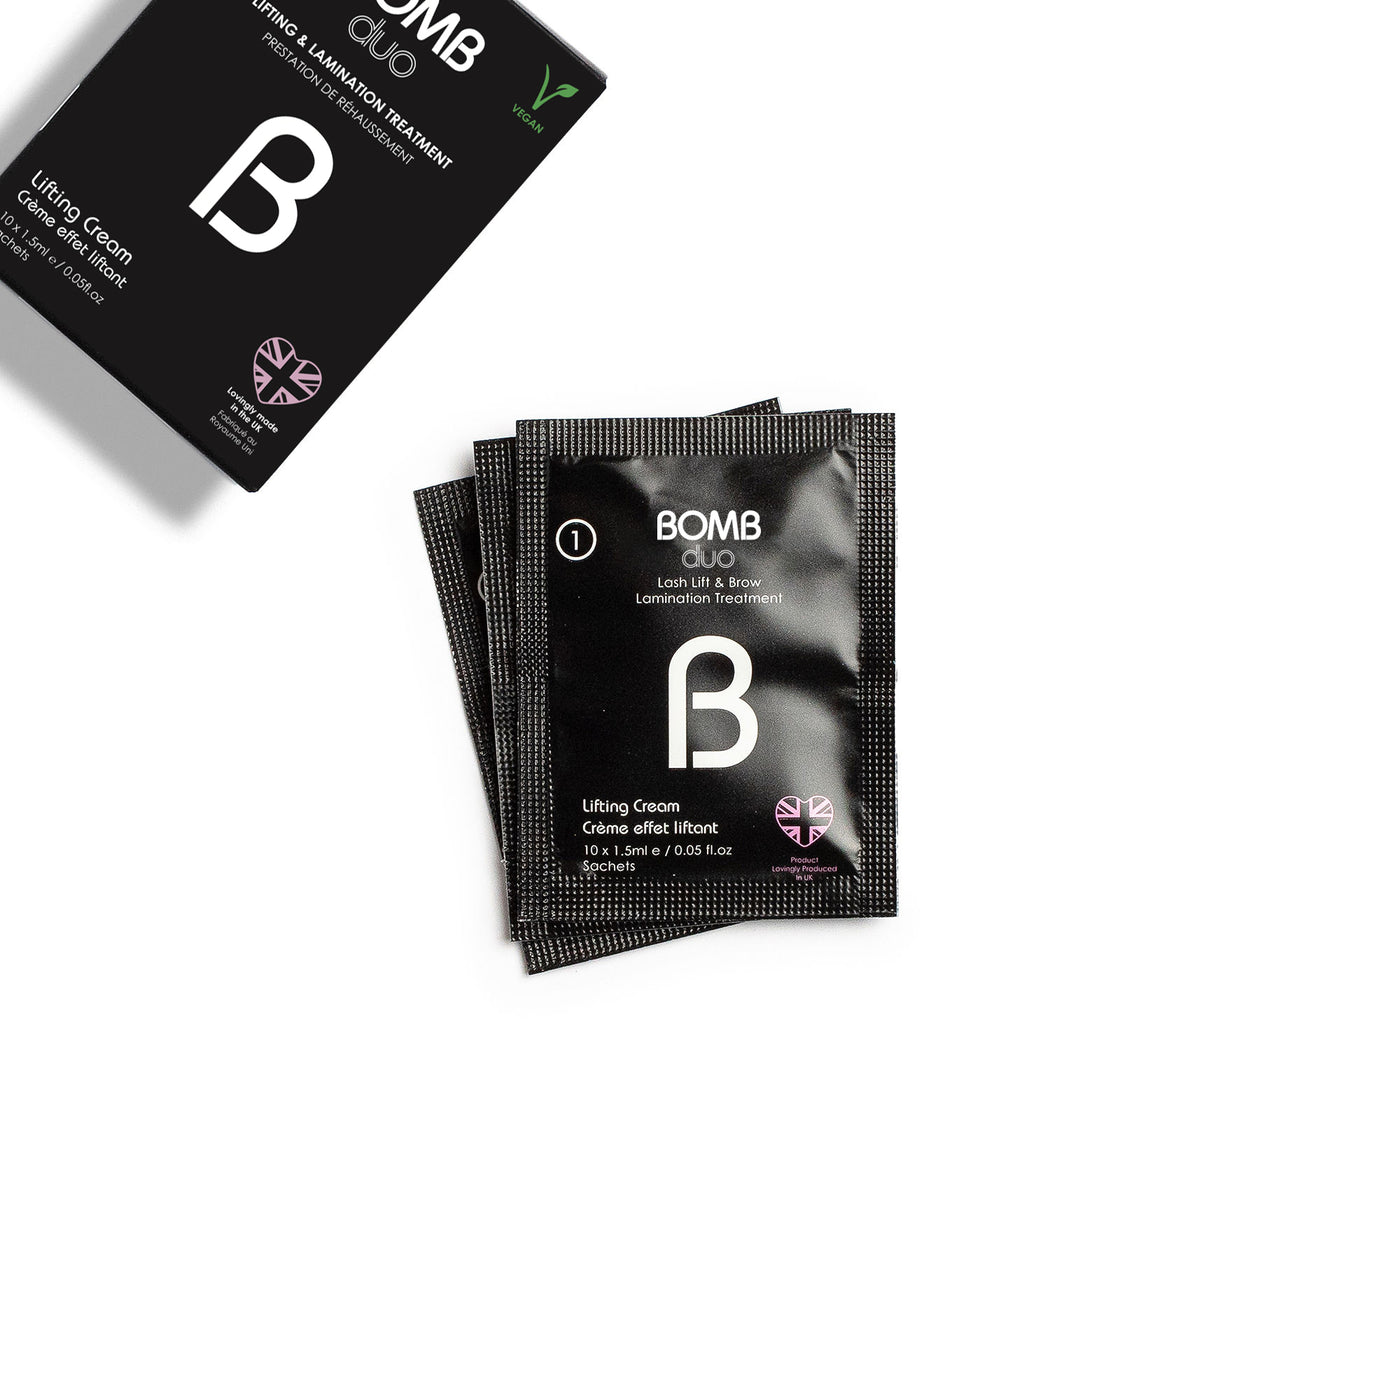 BOMB Duo Lash Lift Lotion Packets